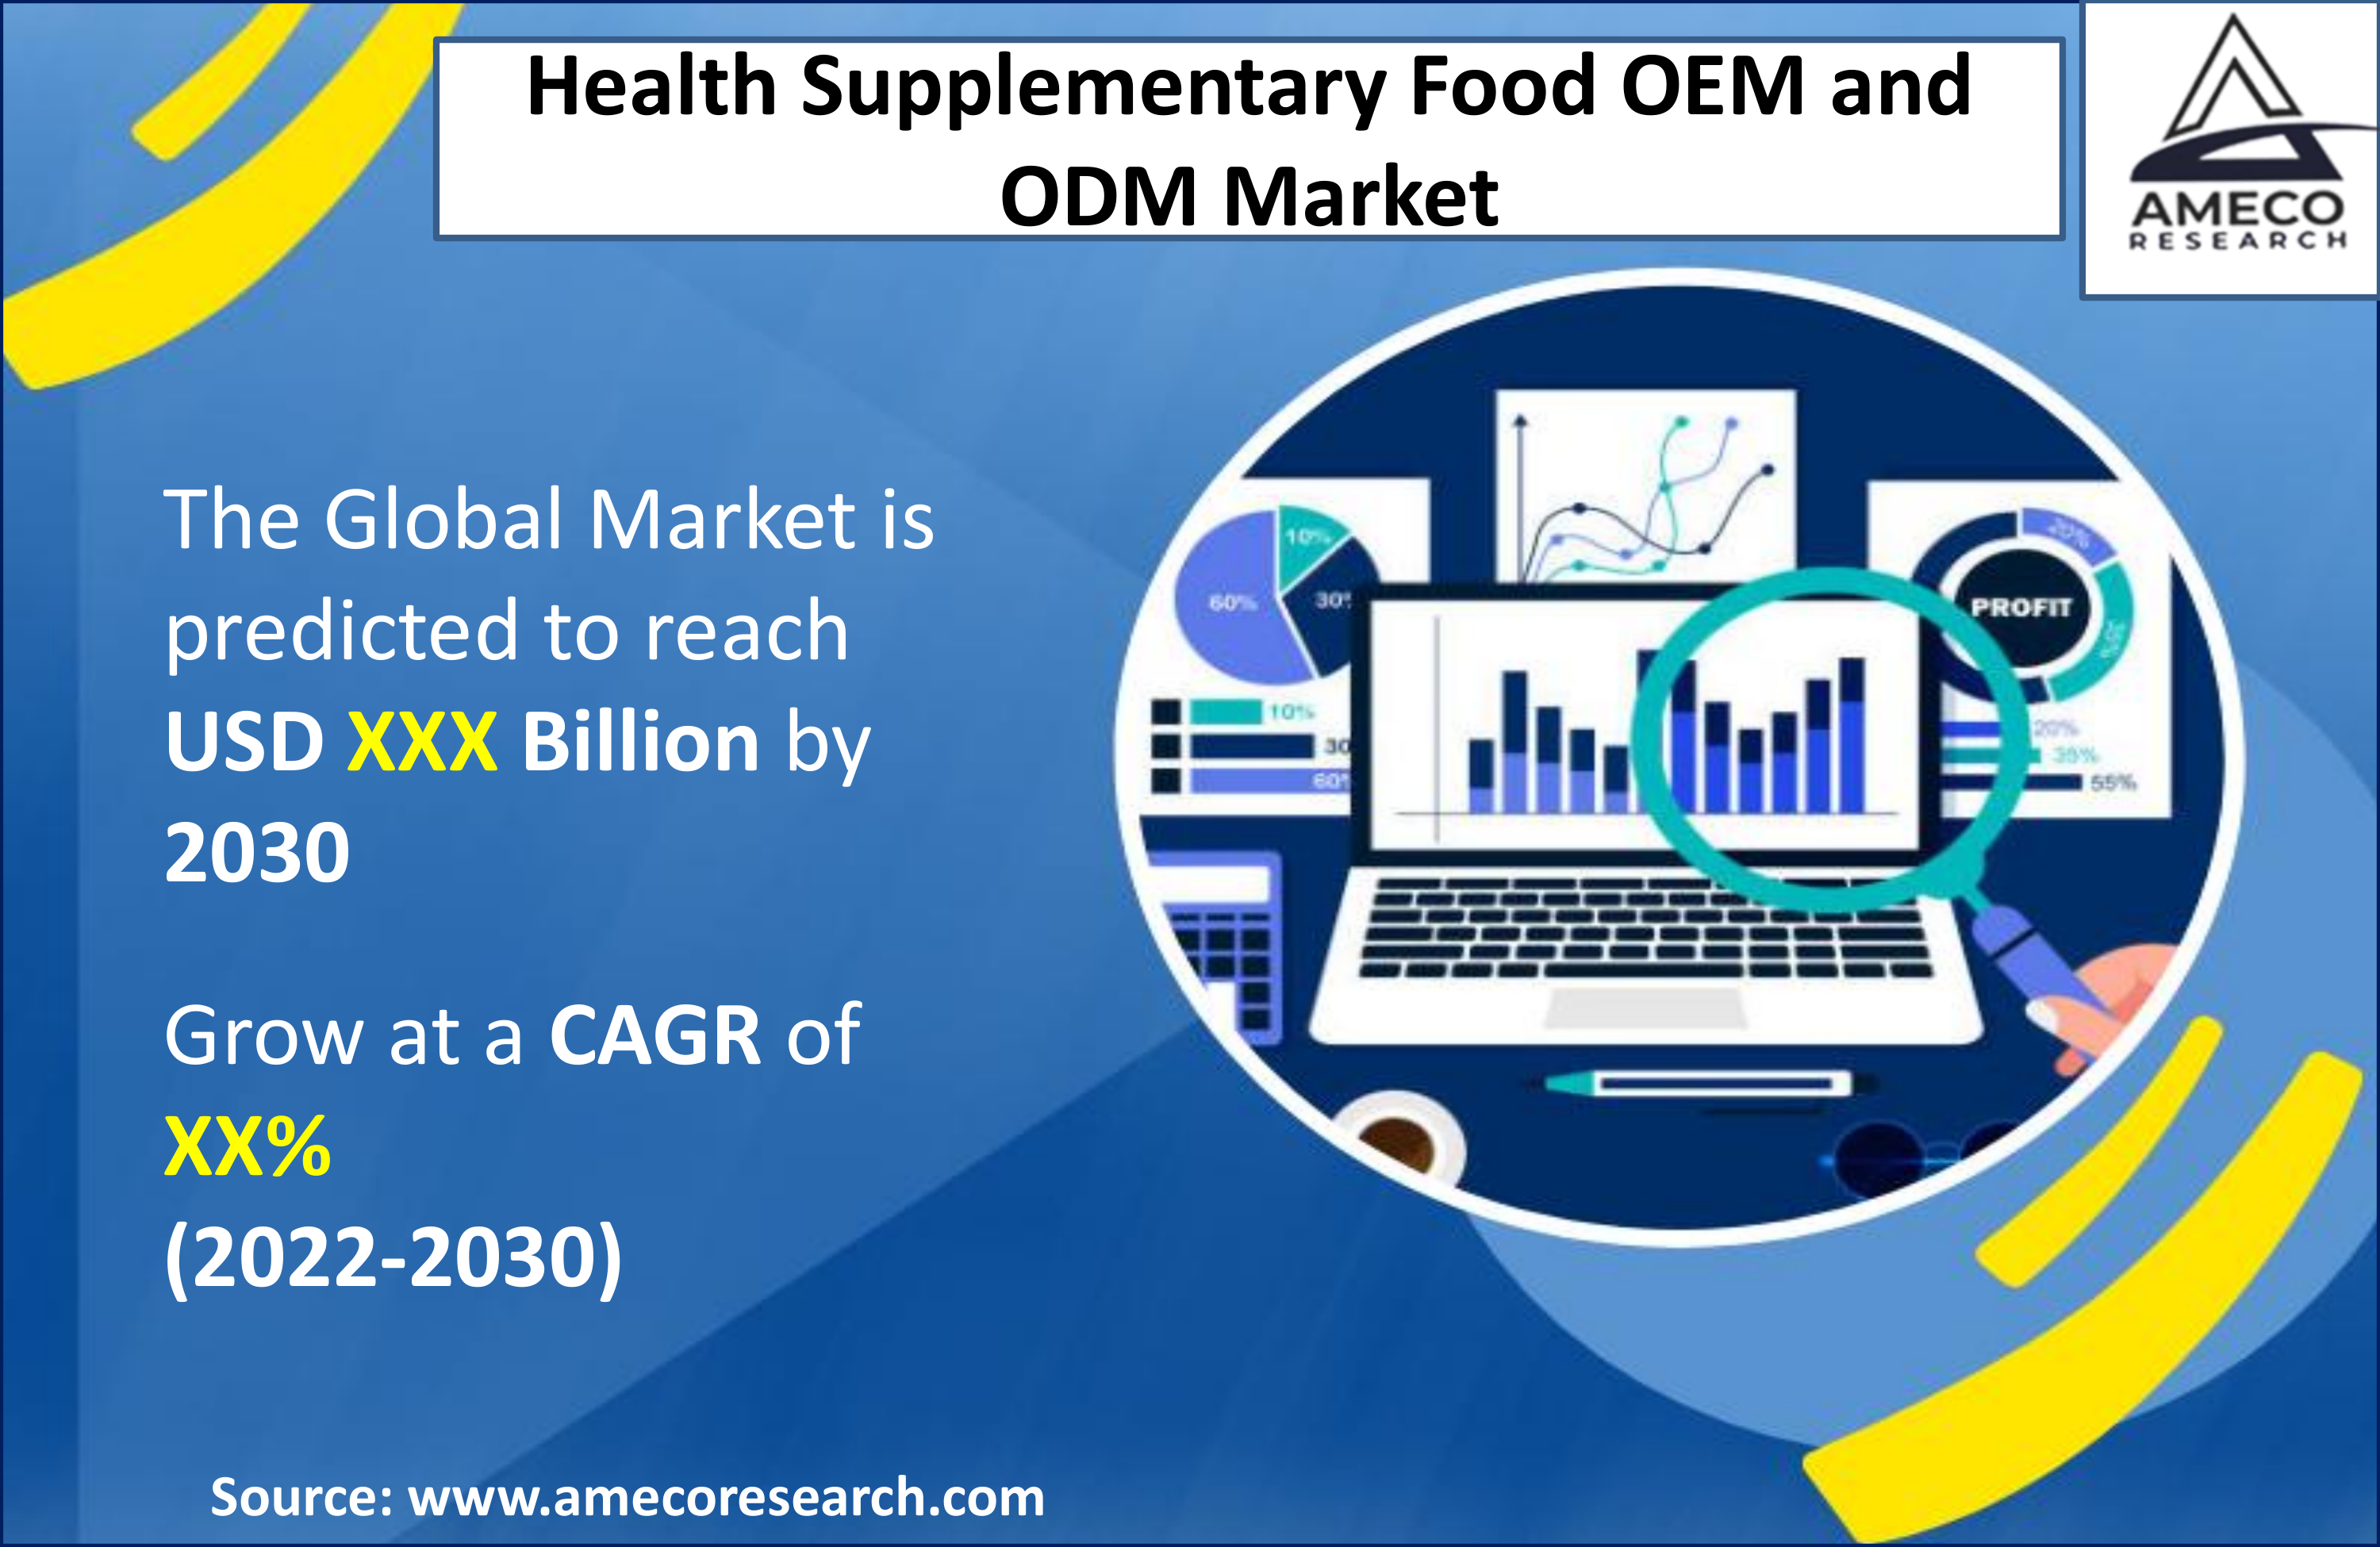 Health Supplementary Food OEM and ODM Market